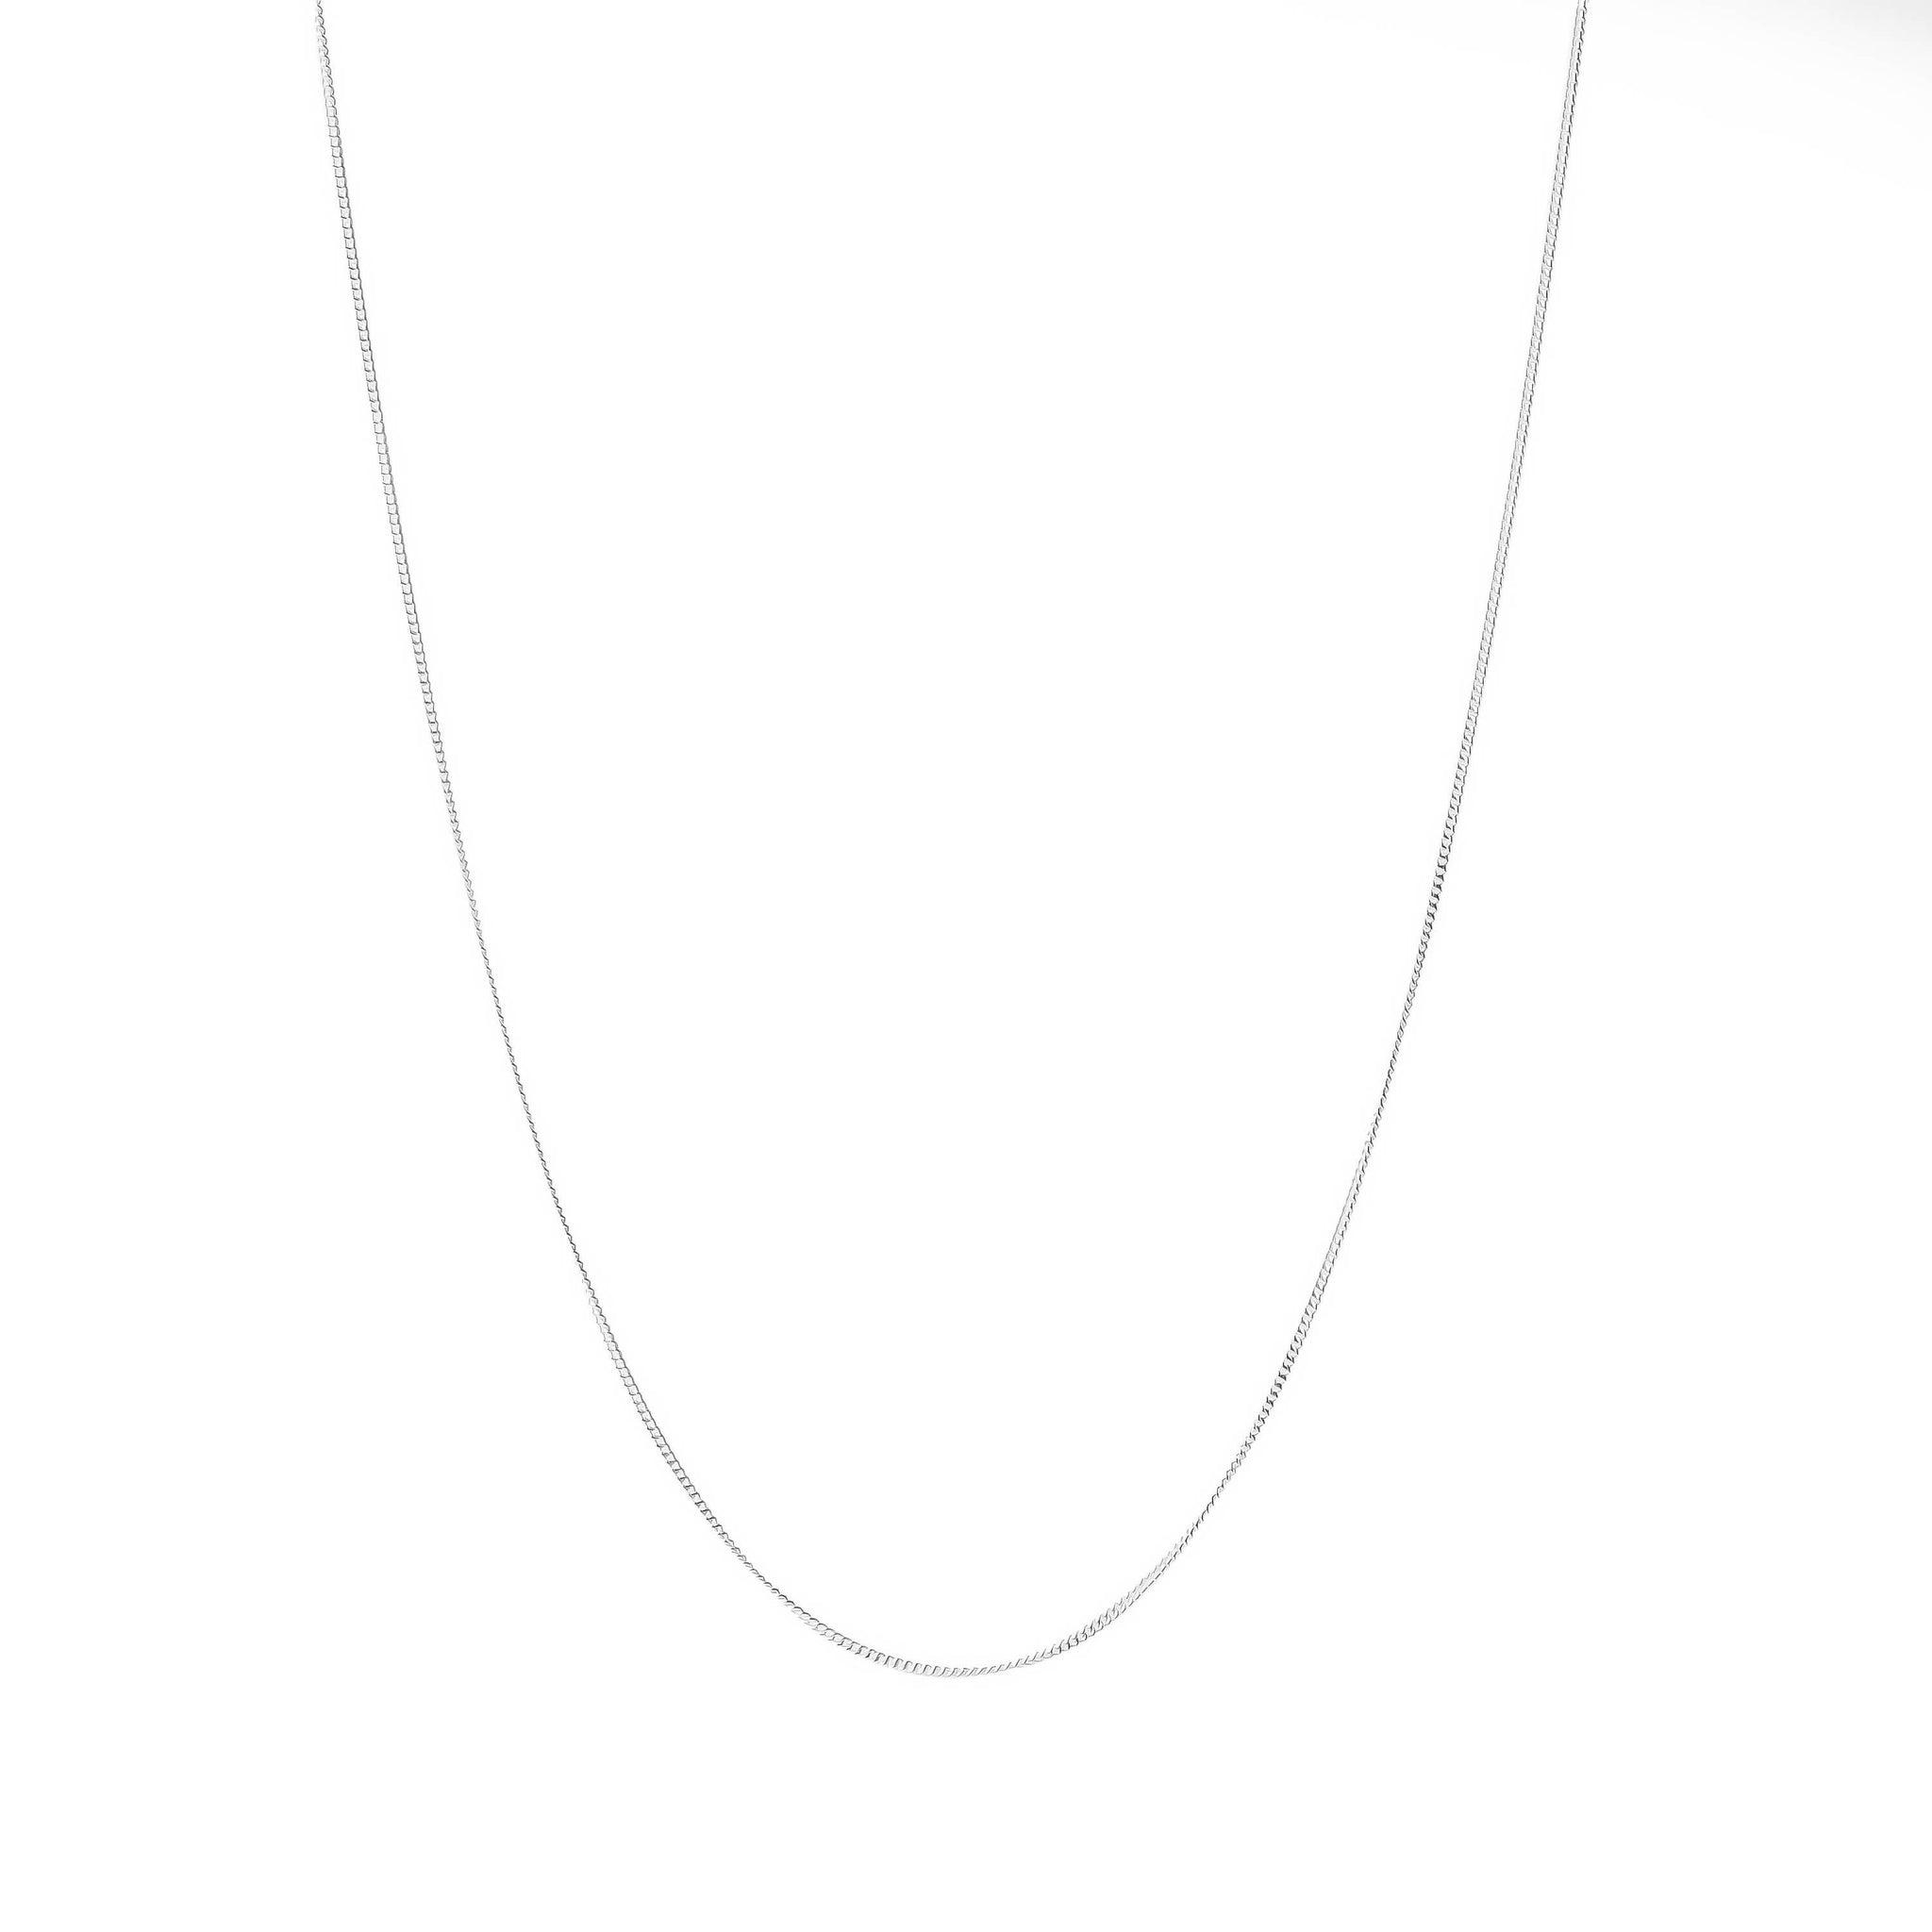 Thin silver chain necklace